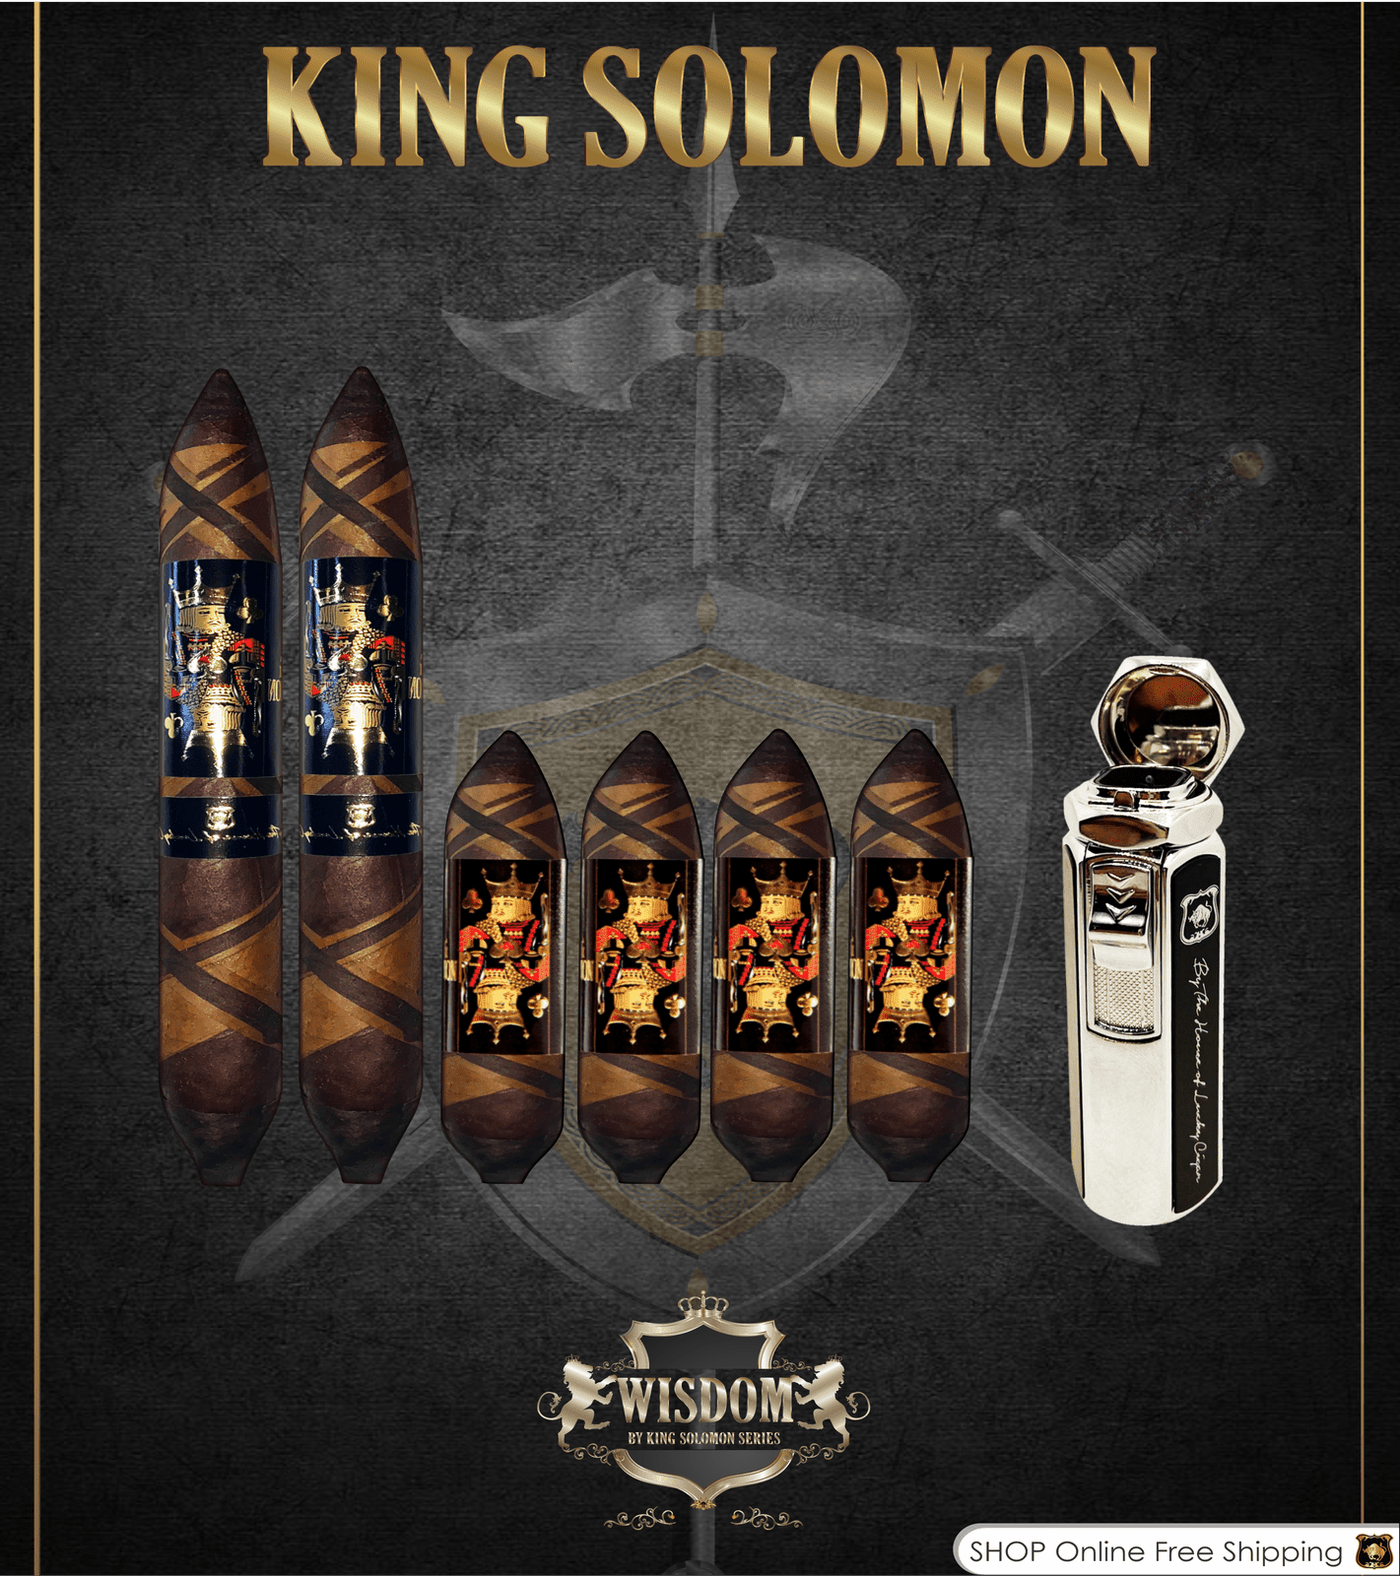 Wisdom 4x60 Cigar From The King Solomon Series: Set of 4 and 2 King Solomon 7x58 Cigar with Torch Lighter